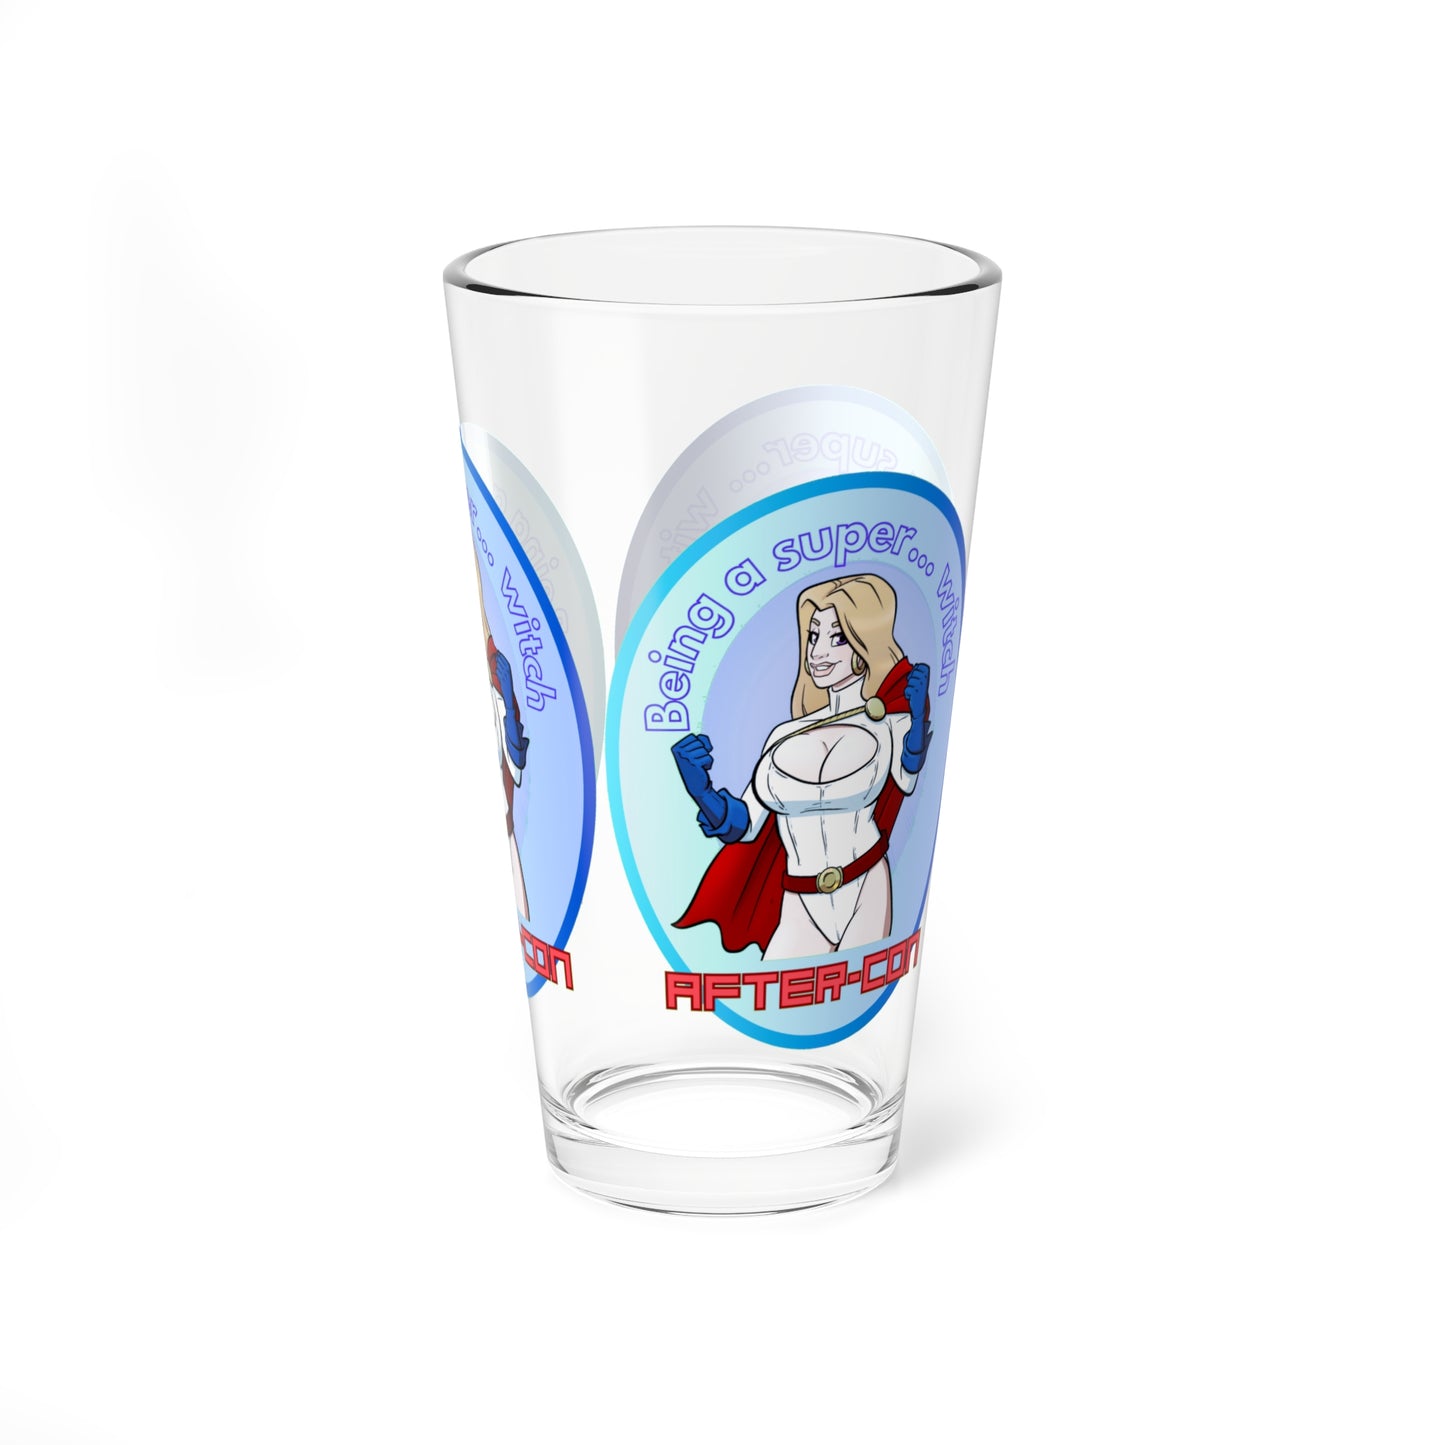 After-Con "Super... witch" Pint Glass, 16oz